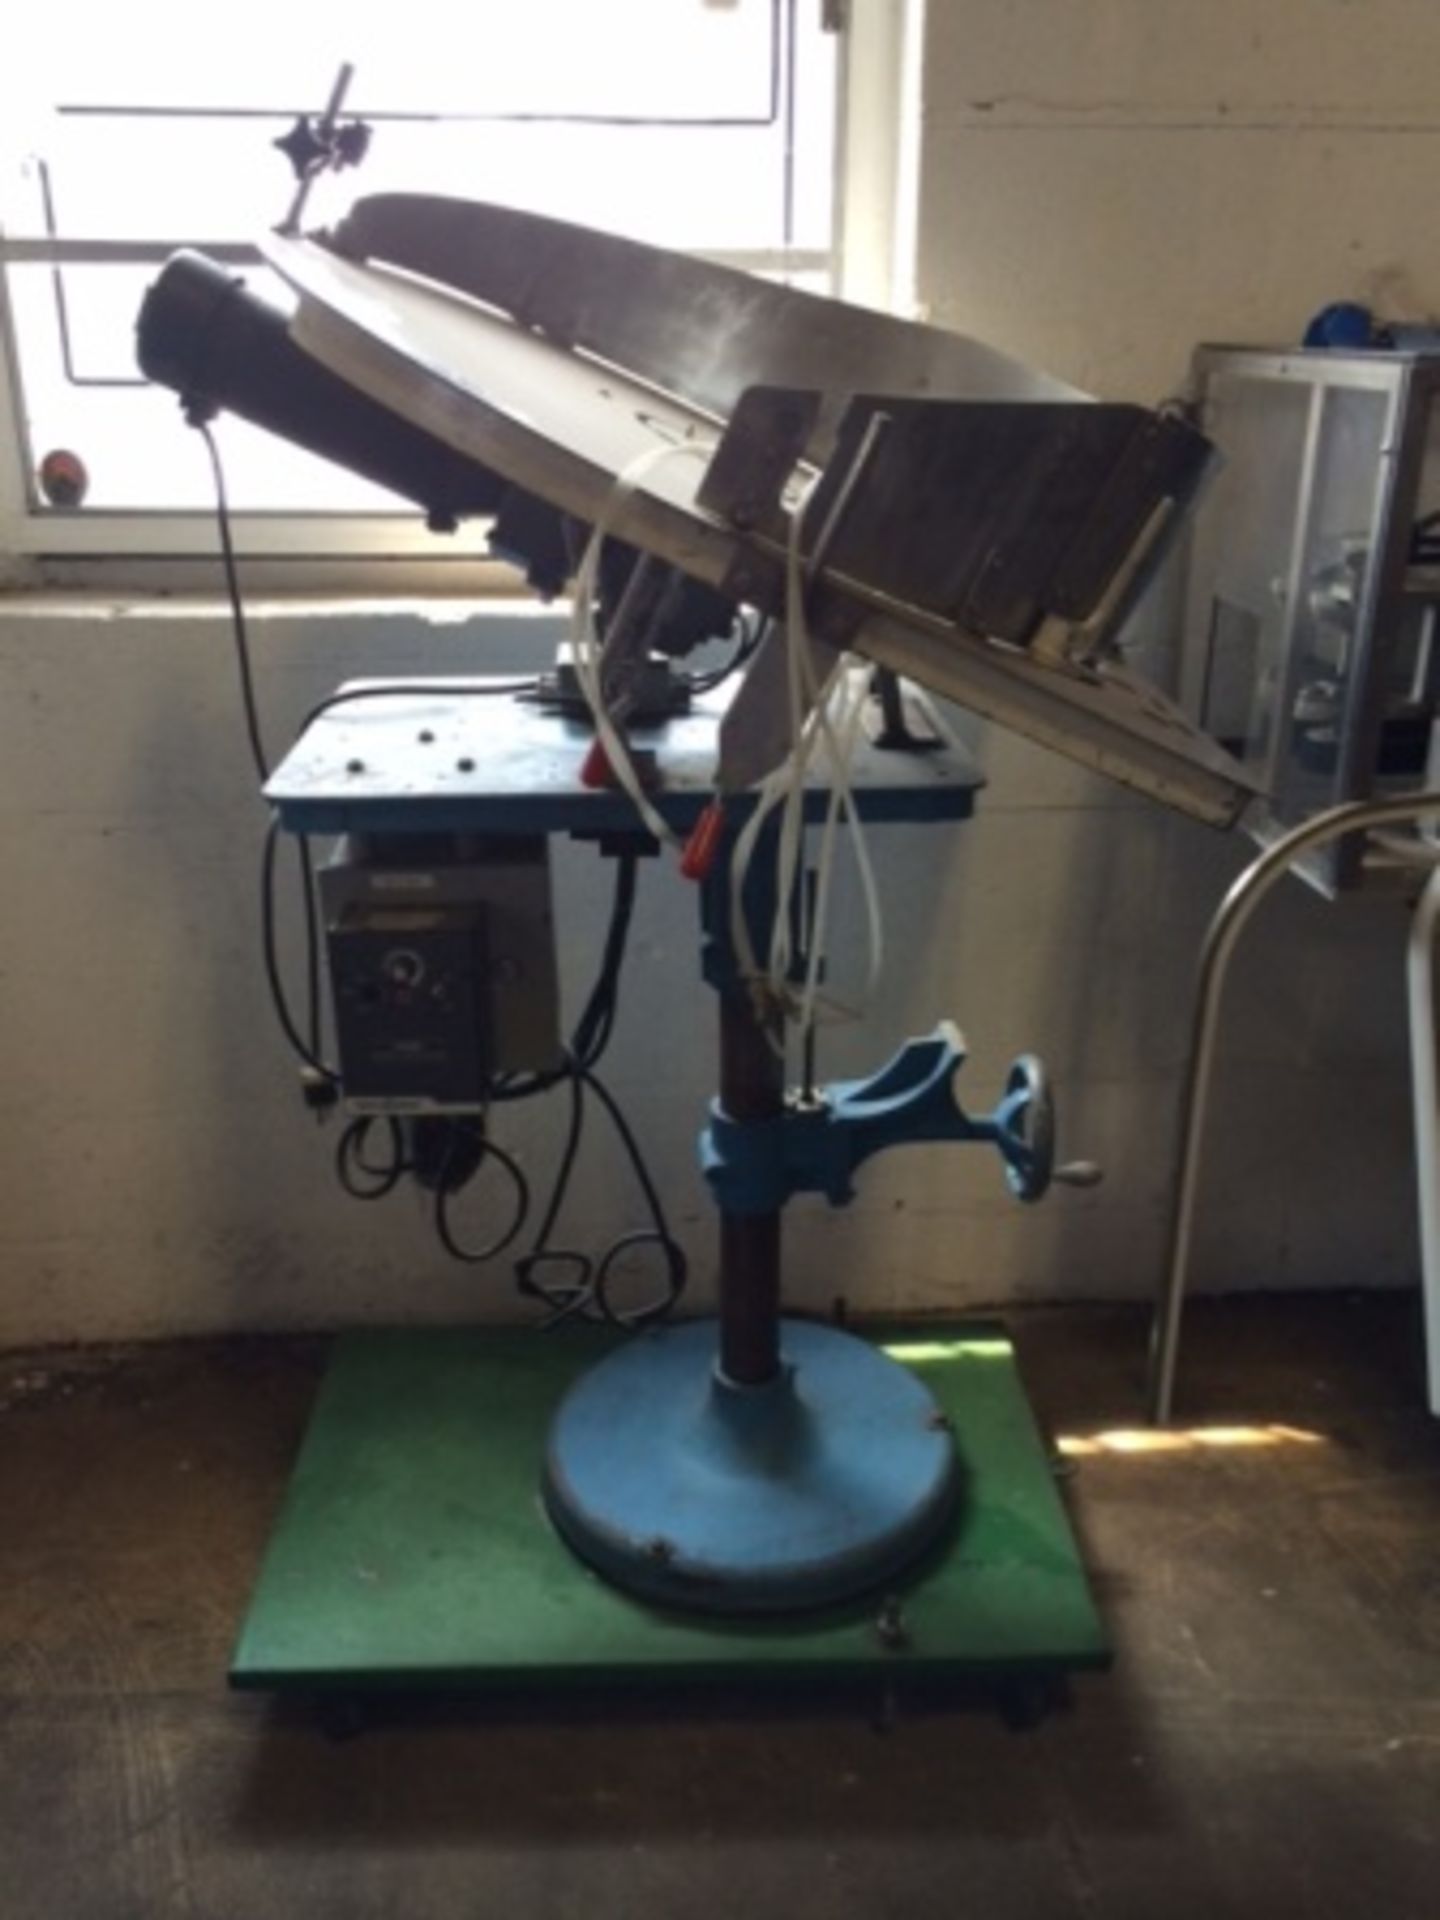 Cozzoli Disk Counter Model T423 2 drop. Unit was just removed from service and was used for Tablet